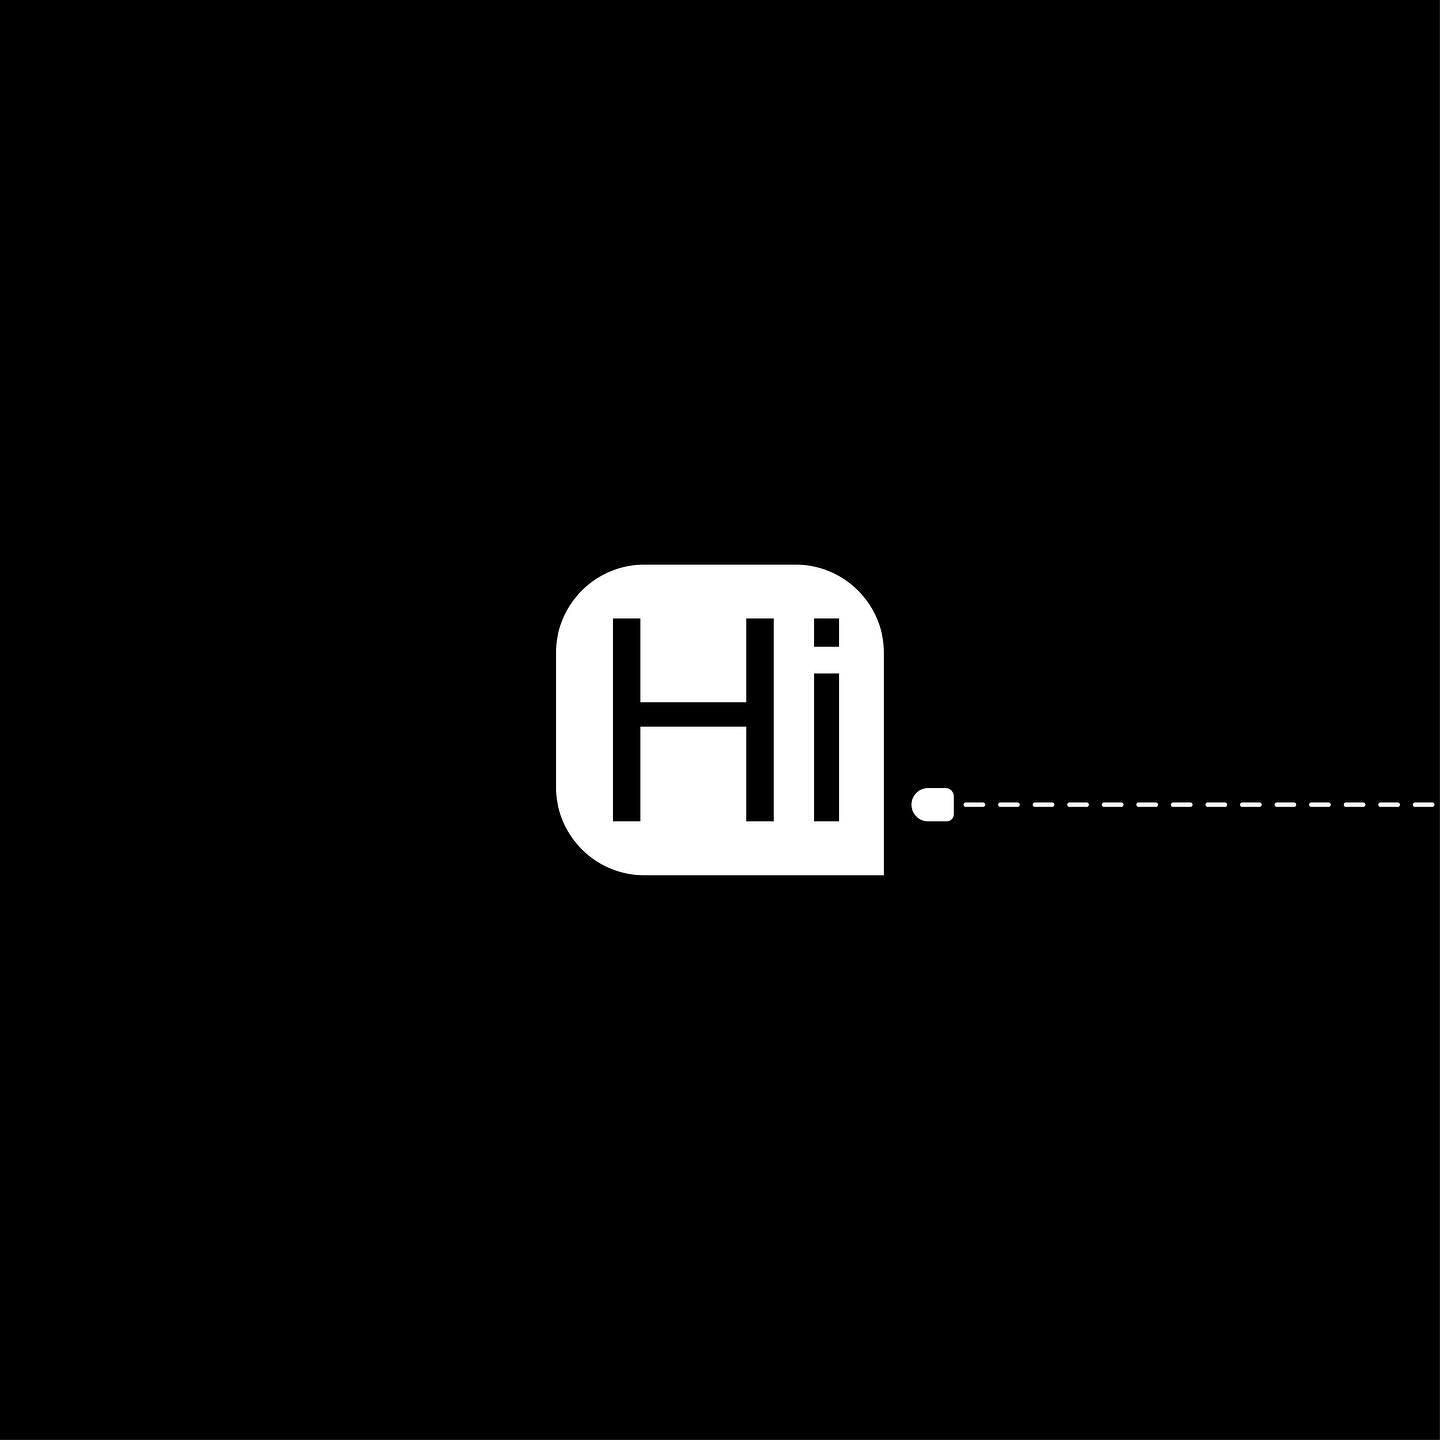 Hi - 

&quot;Hi&quot; in Hi-DARS stands for Hybrid Intelligence. 

Within the Hi-DARS lab's vision and mission, Hybrid Intelligence signifies the fusion of human and machine intelligence across varied levels and scales in design and production proces